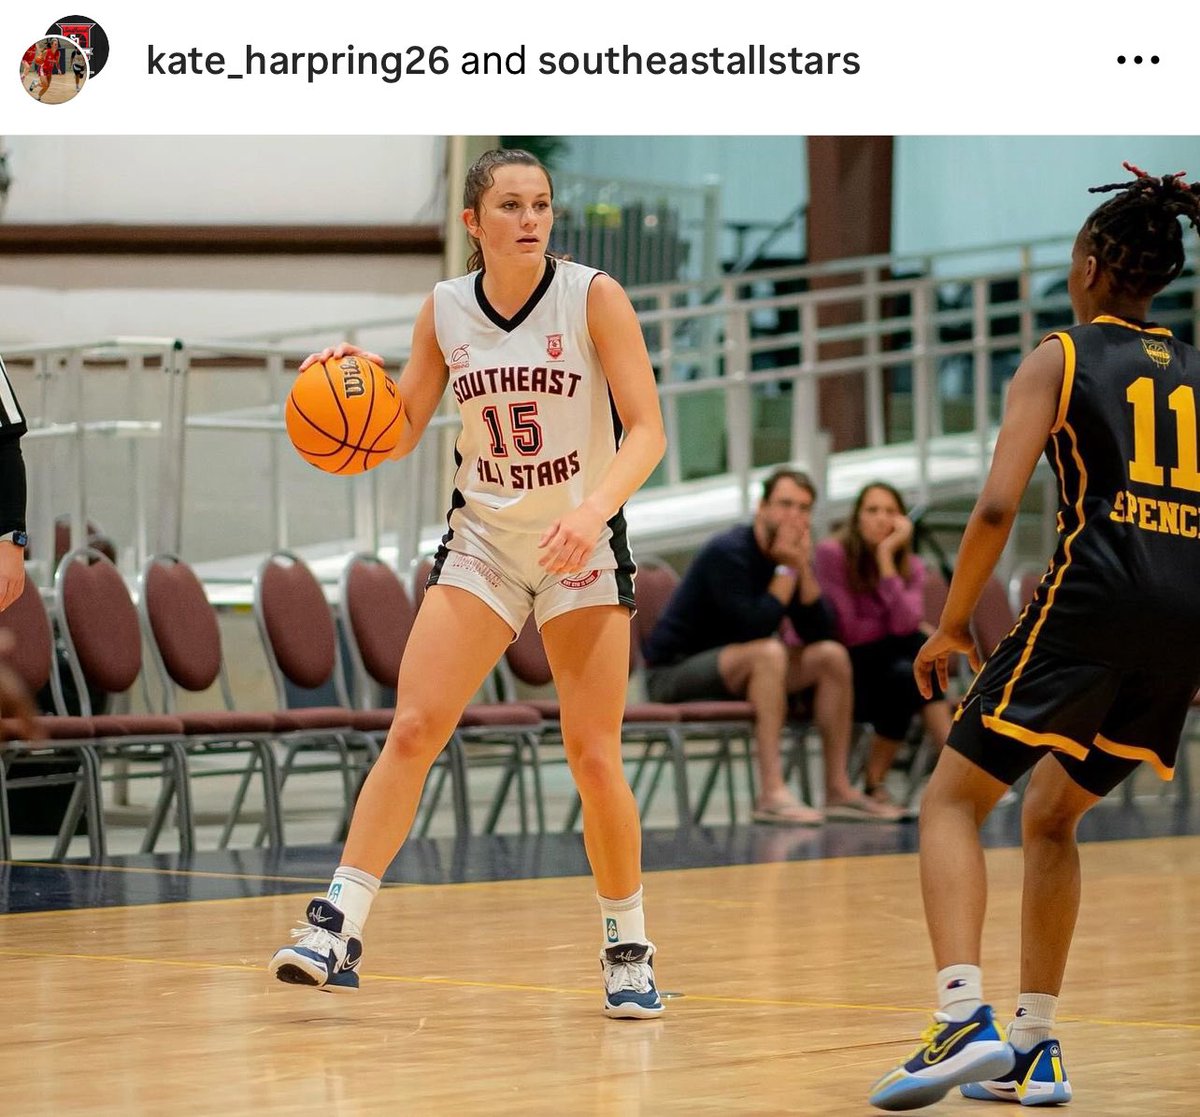 Brandon Clay Consulting x Southeast All Stars 🖤❤️🤍 | #BClayConsulting | Powered by @bclayscouting ‘26 G Kate Harpring of Marist School (GA) has an offer from Kentucky. Harpring was named as a 🇺🇸 Basketball U17 Trials invitee today. SITE southeastallstars.com @KySportsRadio